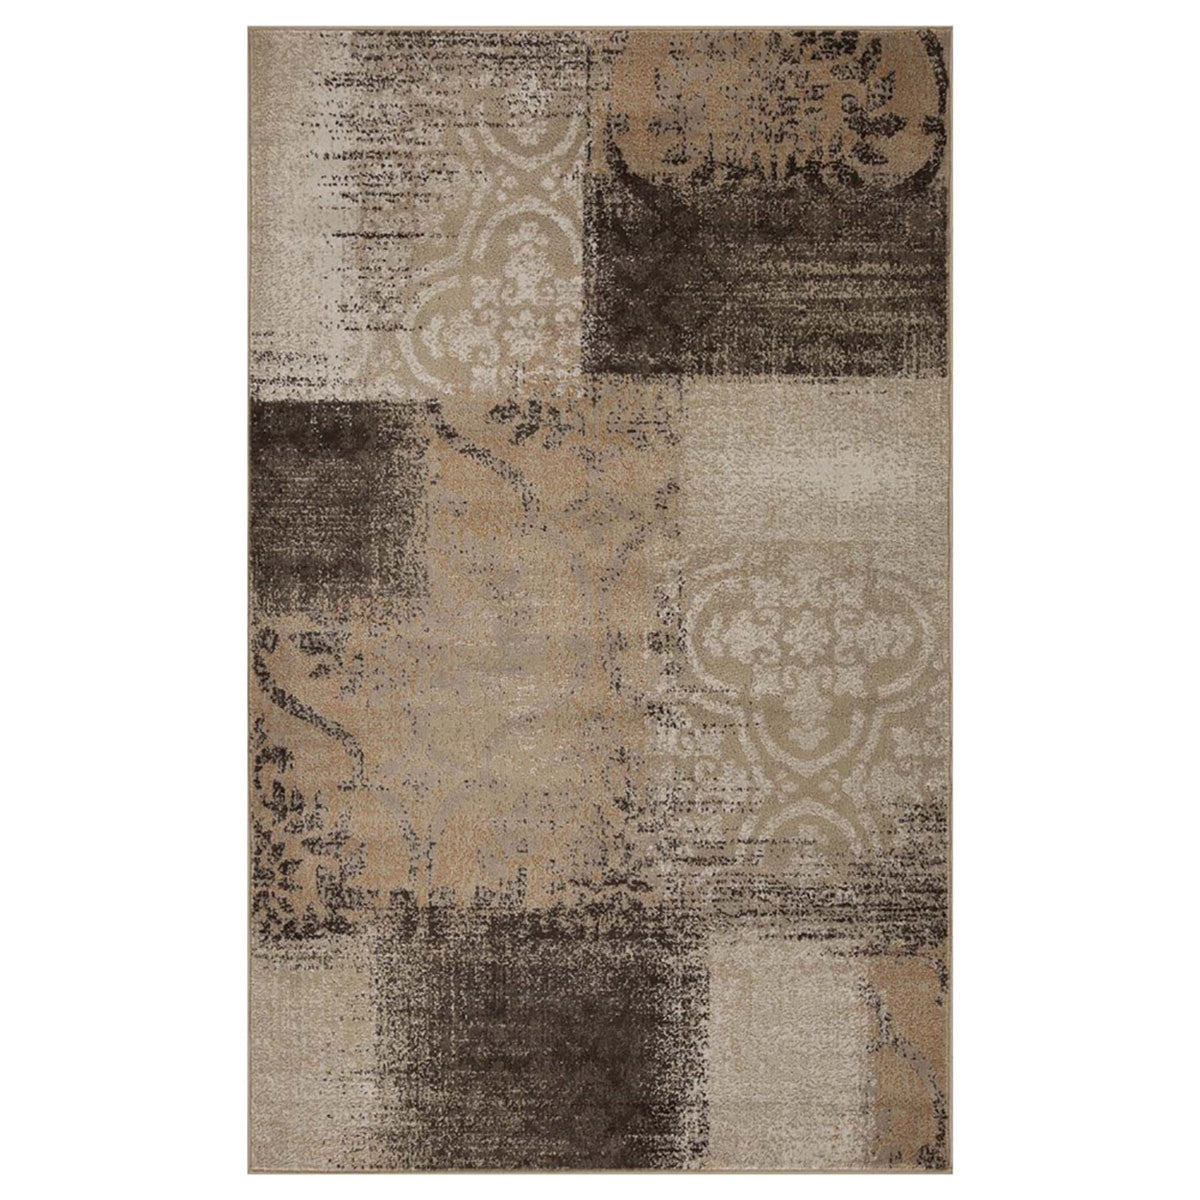 7' X 9' Beige Gray And Black Damask Distressed Stain Resistant Area Rug